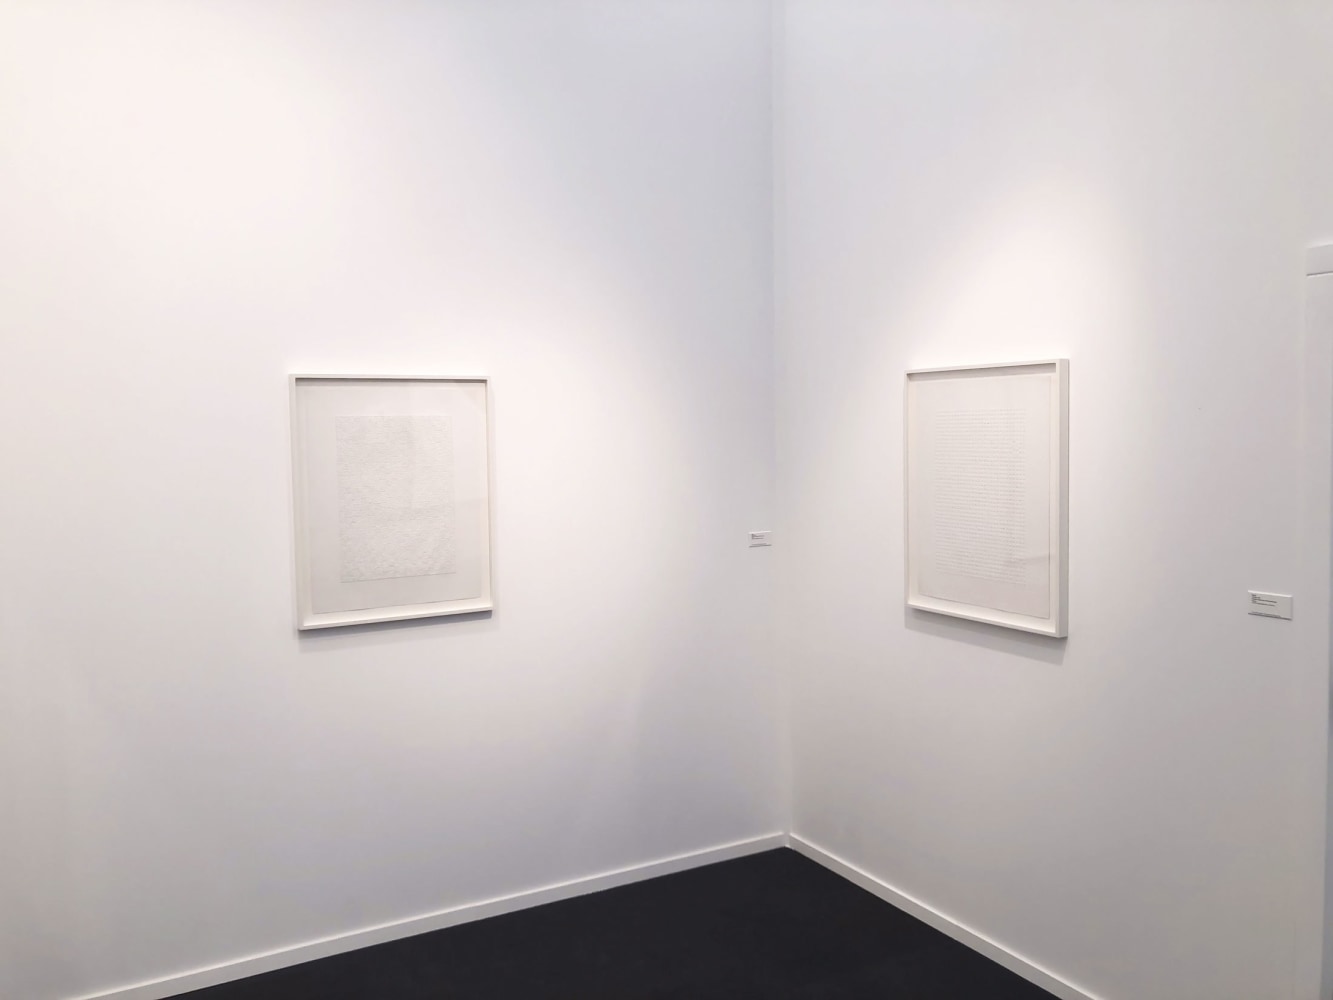 Luhring Augustine

Frieze Masters, Stand 306

Installation view

2018